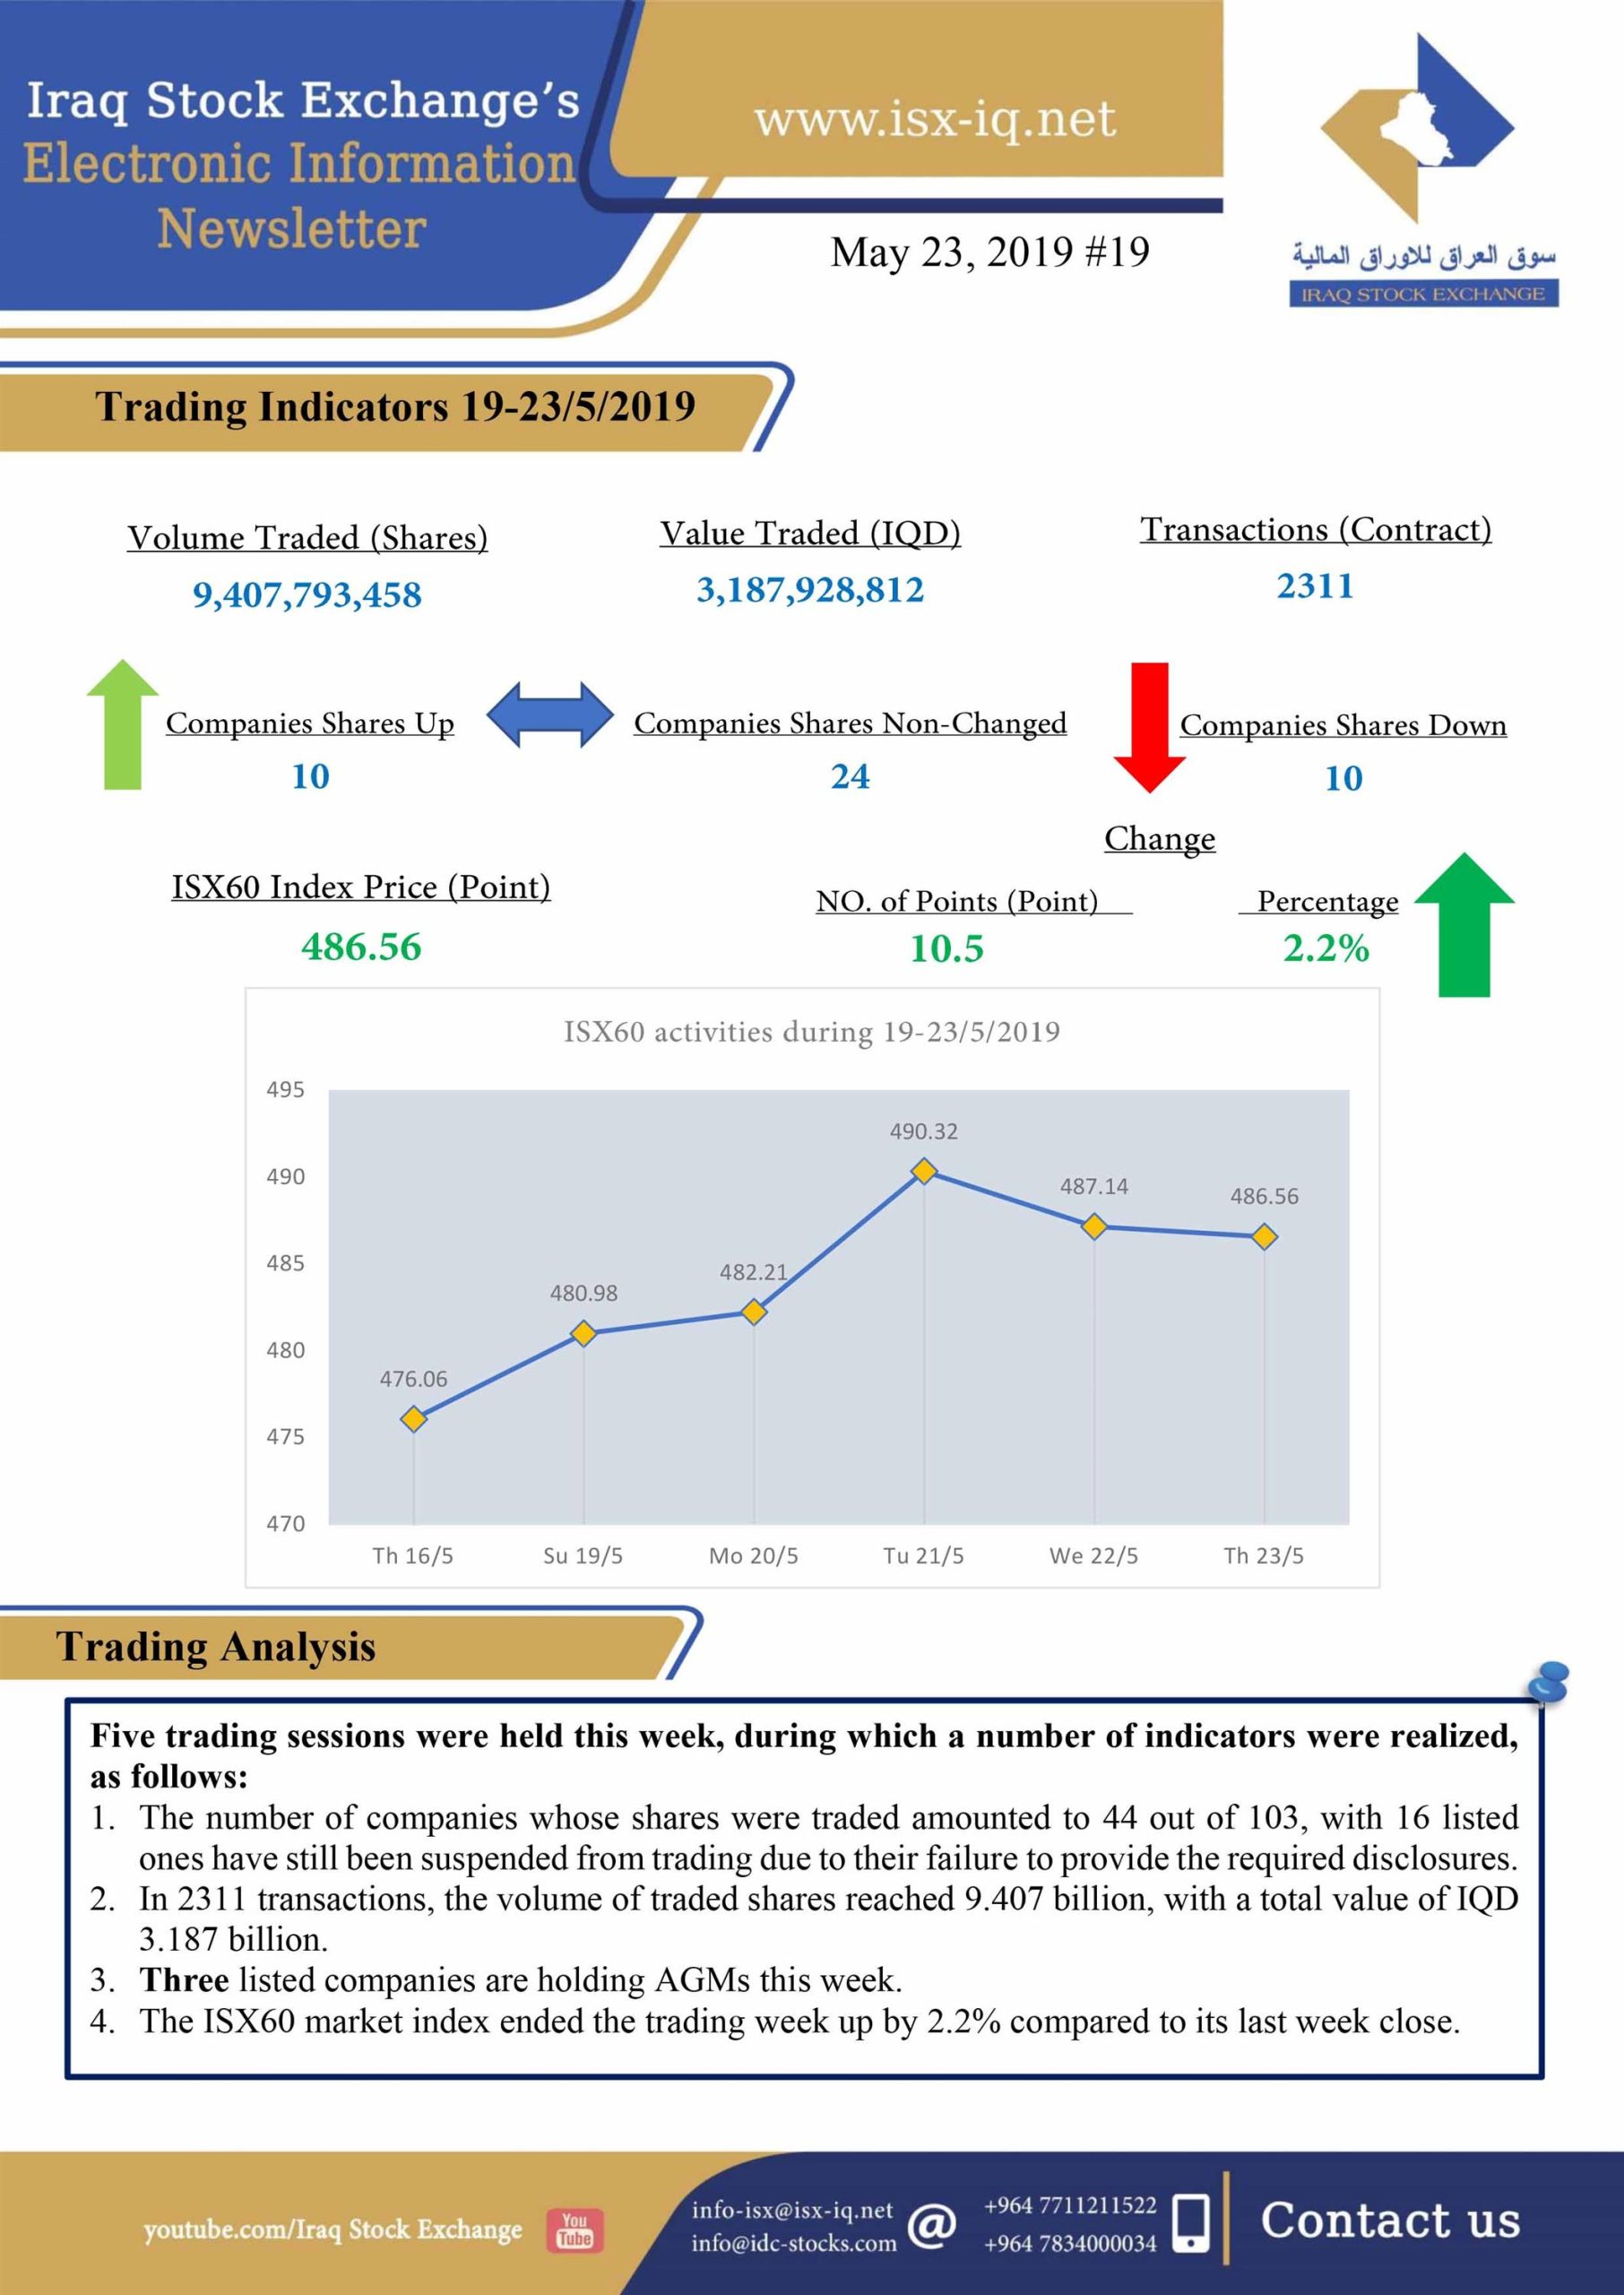 You are currently viewing Issue number 19 of (Iraq Stock Exchange’s Electronic Information weekly Newsletter)